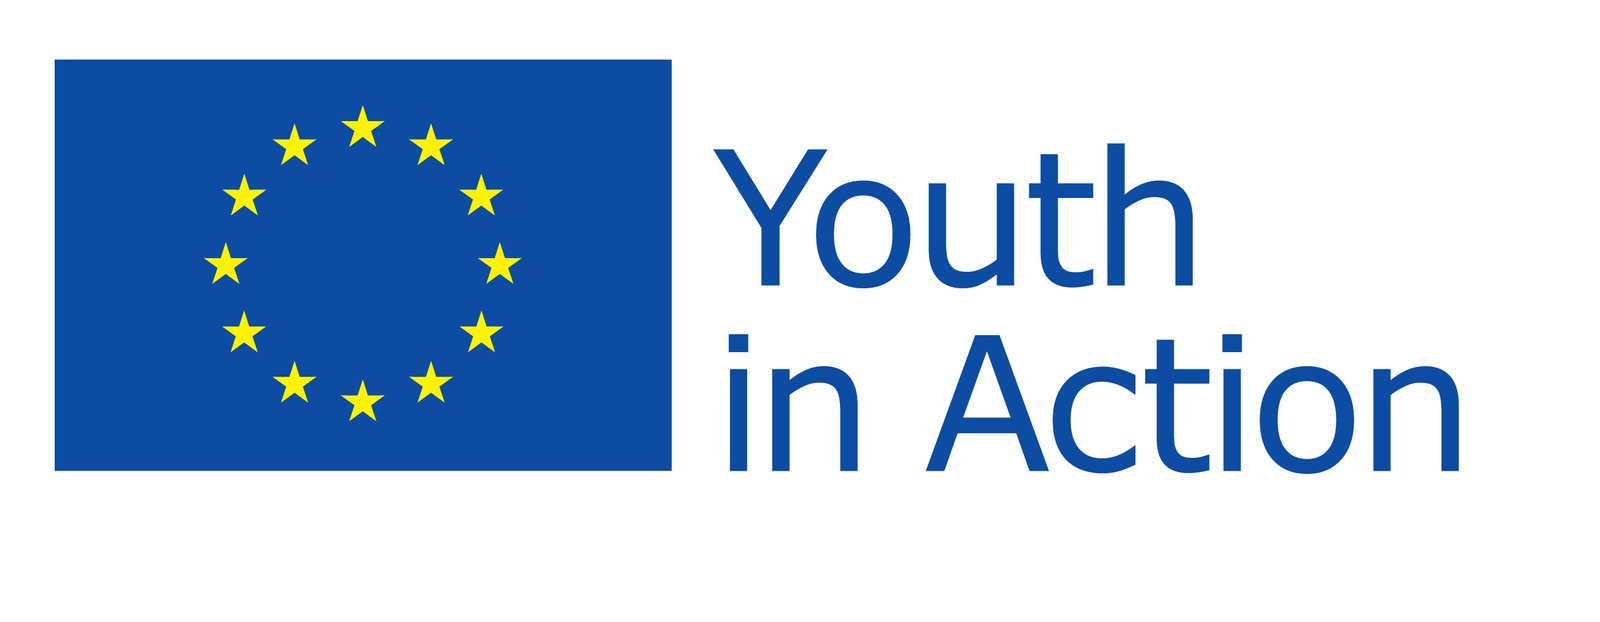 Youth in Action project